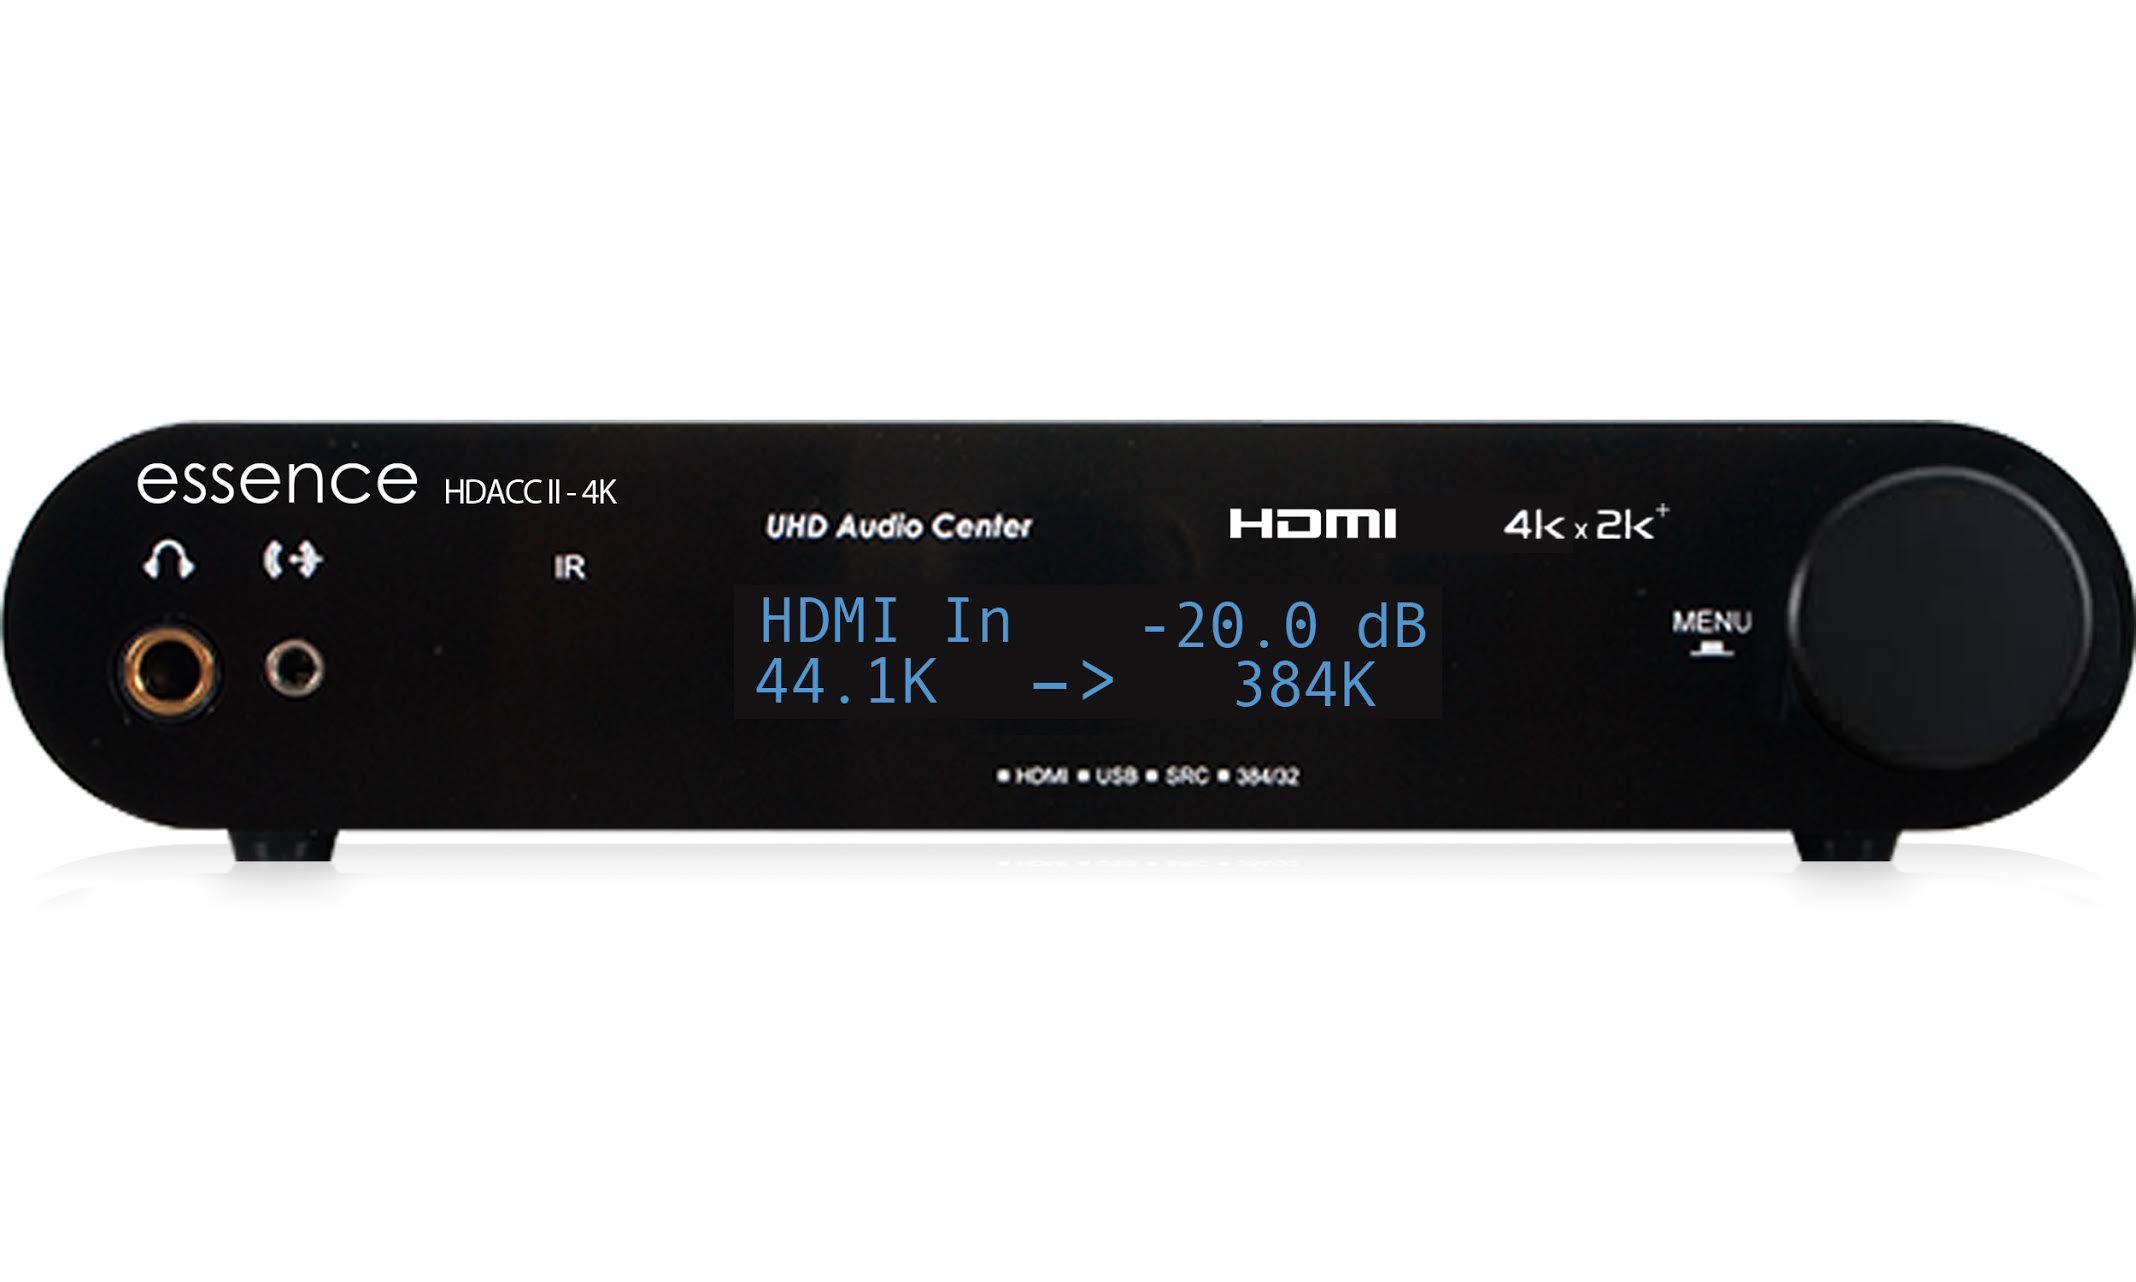 ROON - discussione generale - Pagina 14 Essence-HDACC-II-4K-front